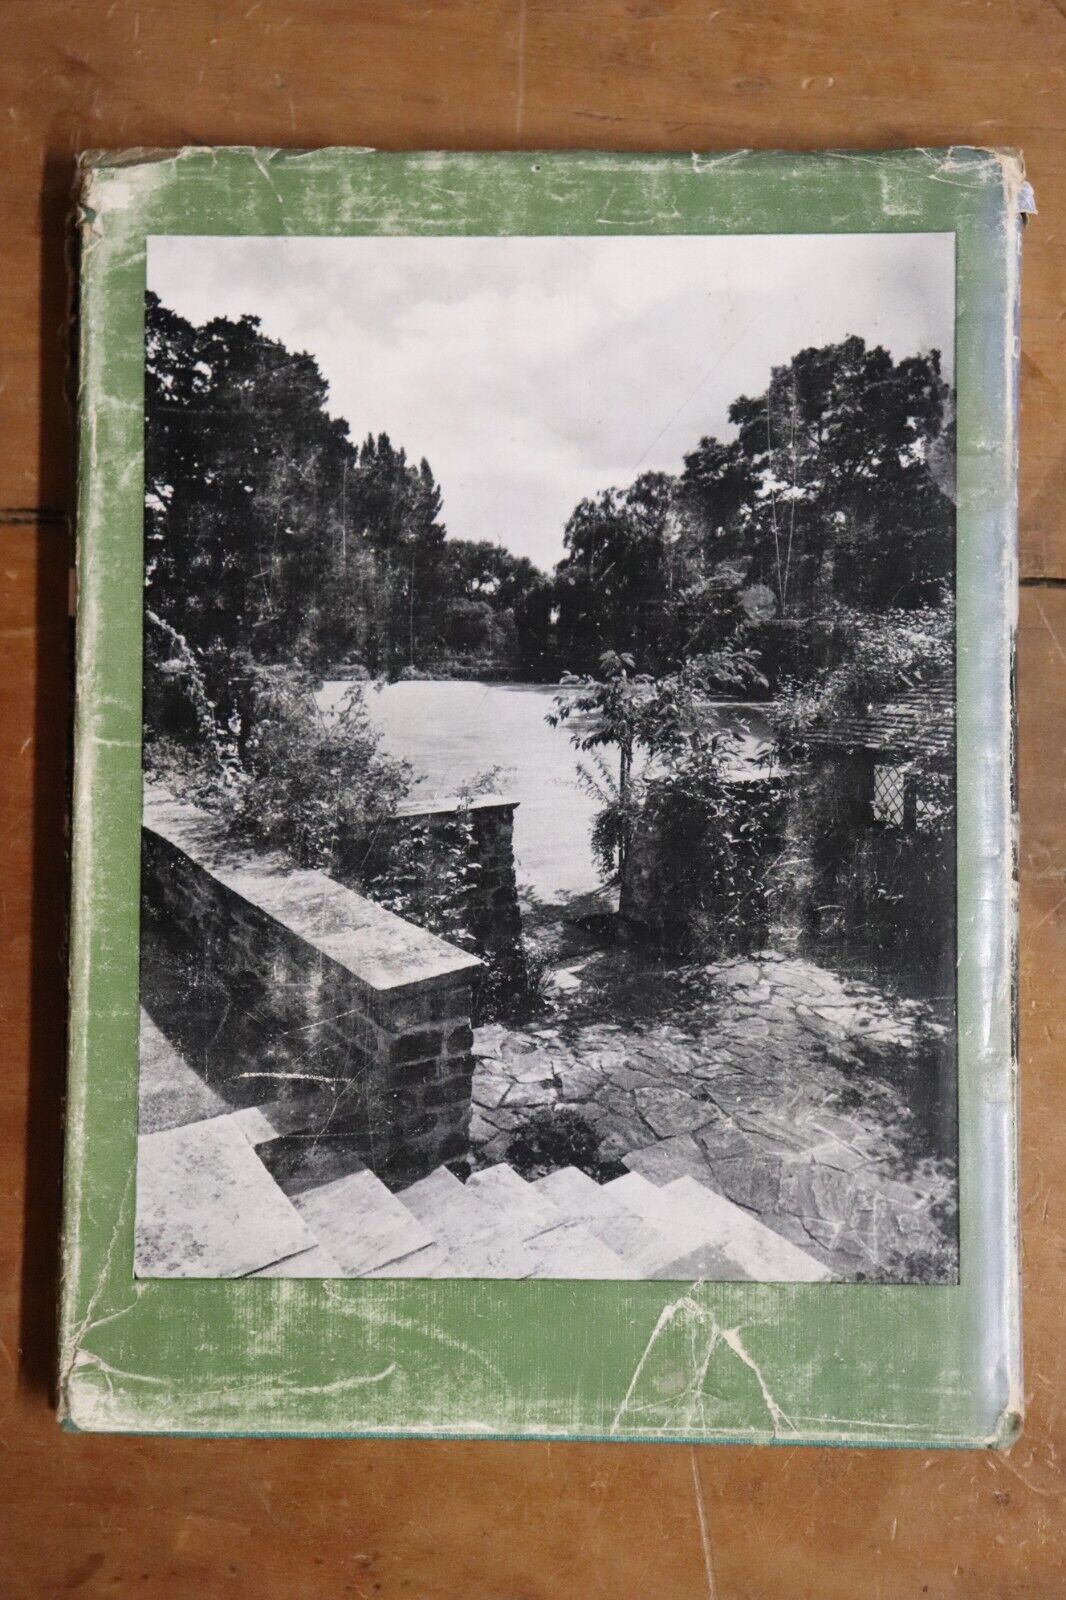 The Earth Is My Canvas - 1956 - Architectural Garden Design Book 1st Edition